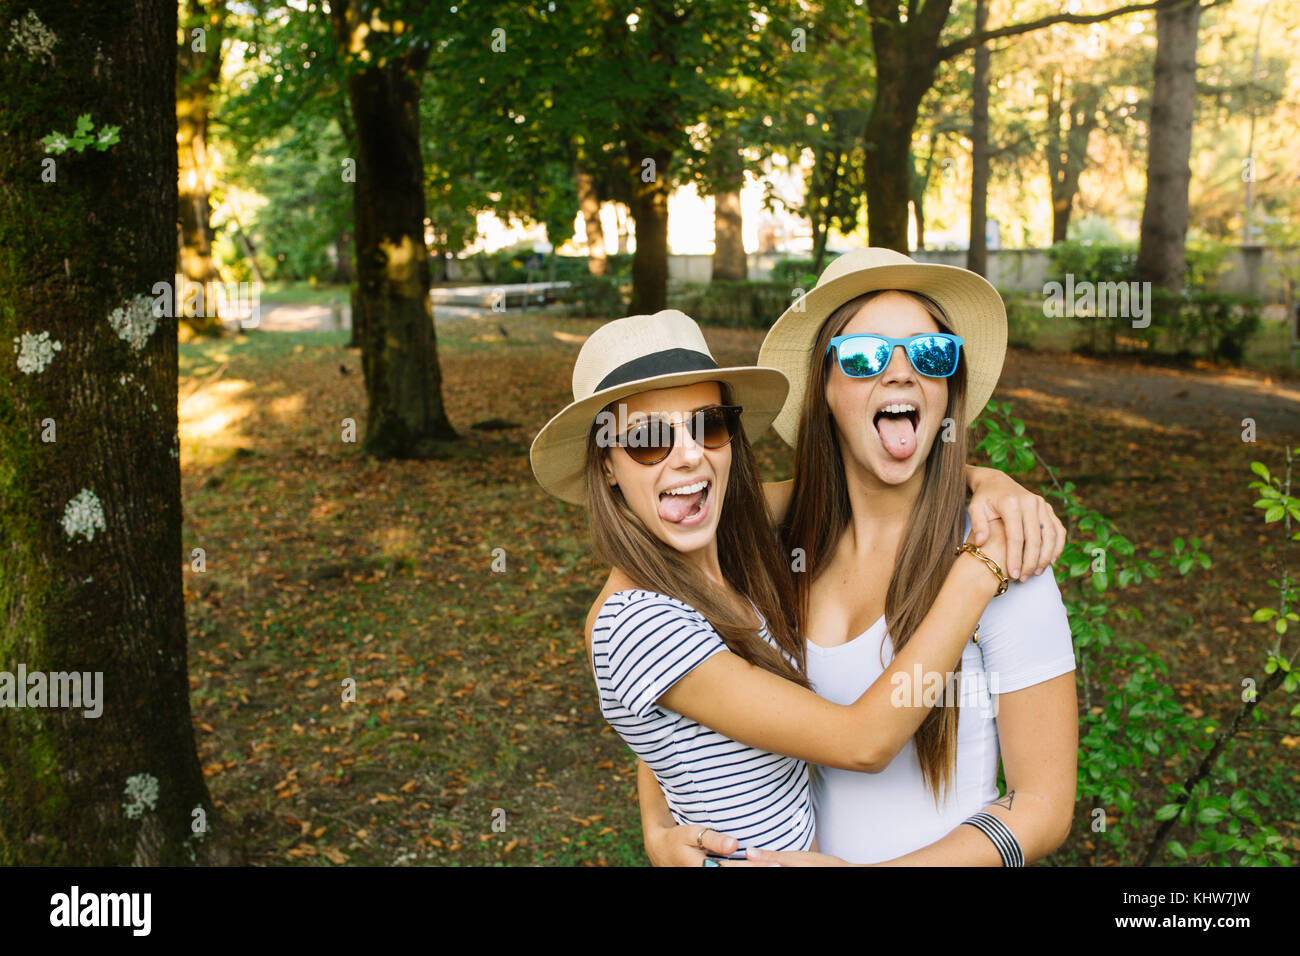 Portrait of two young female friends in trilby hats sticking out tongues in park Stock Photo